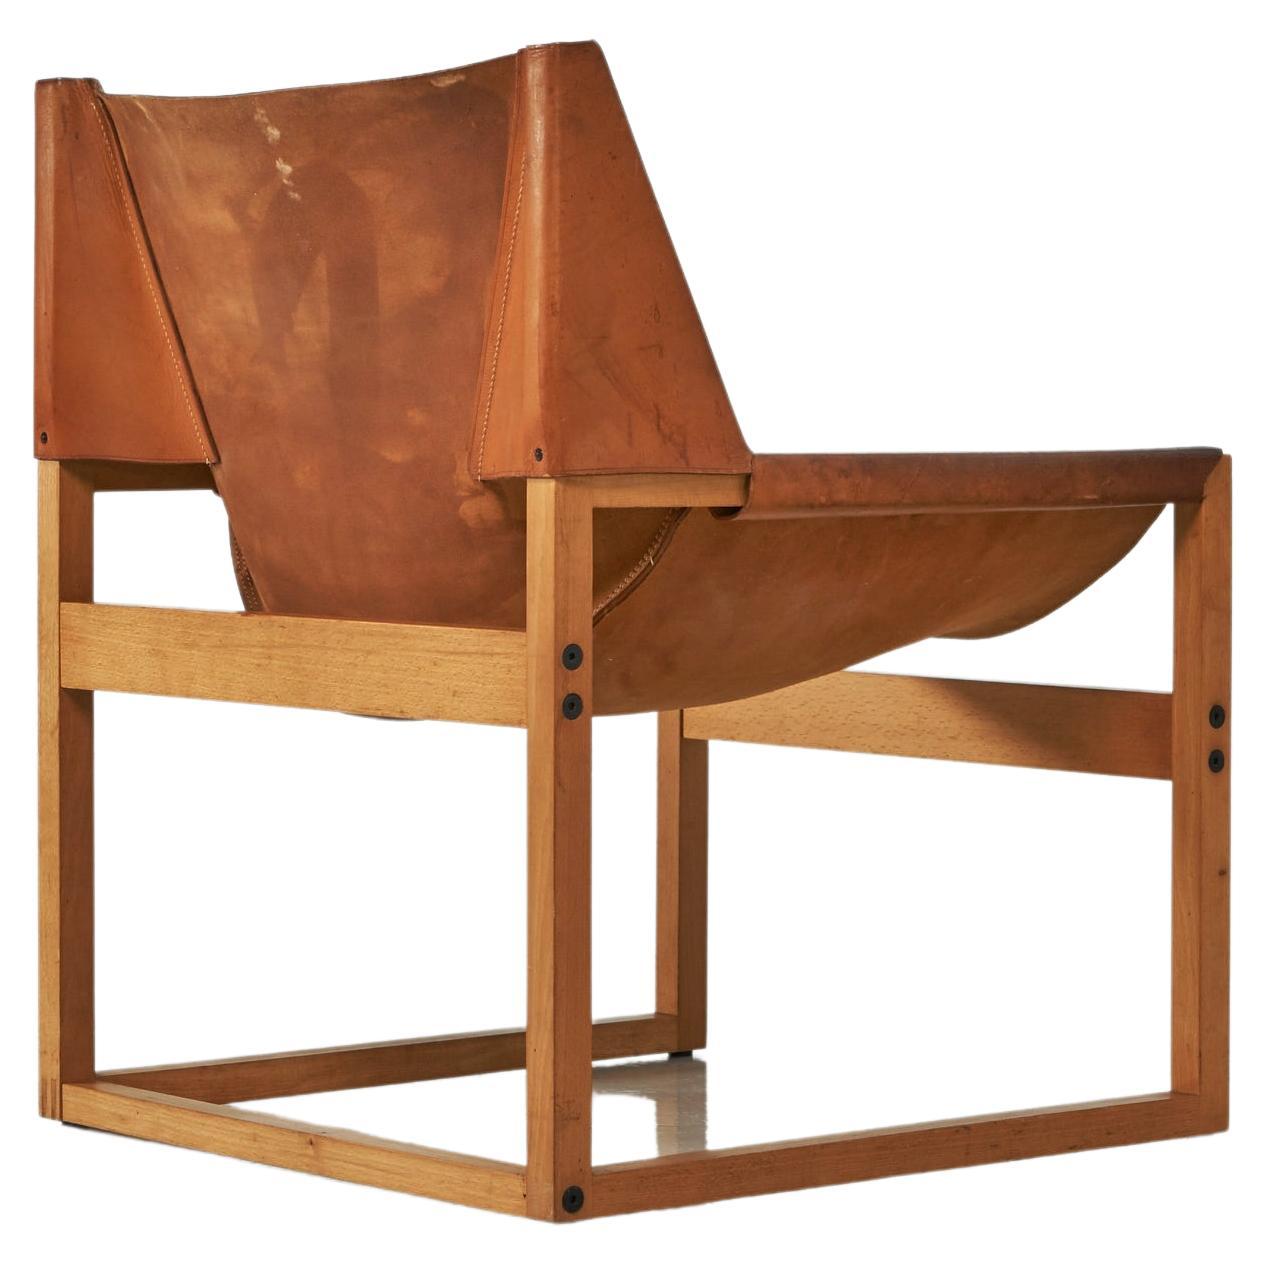 Rainer Schell Canto chair for Franz Schlapp, Germany, 1964 For Sale